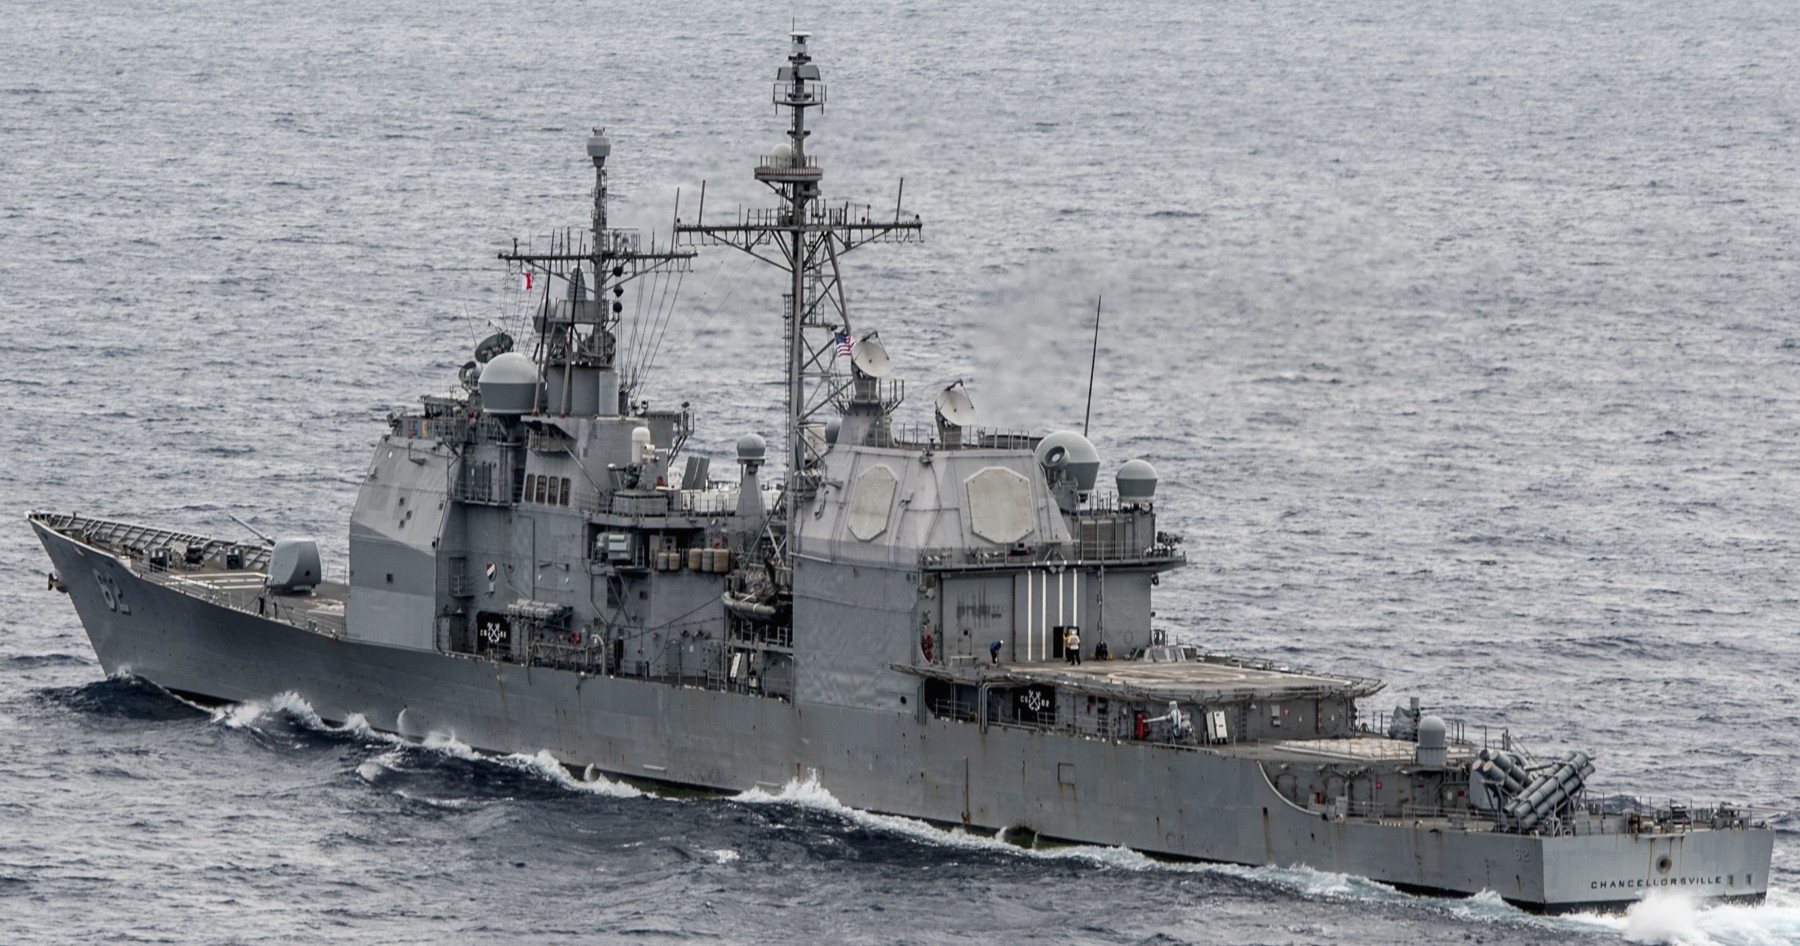 cg-62 uss chancellorsville ticonderoga class guided missile cruiser aegis us navy south china sea 57